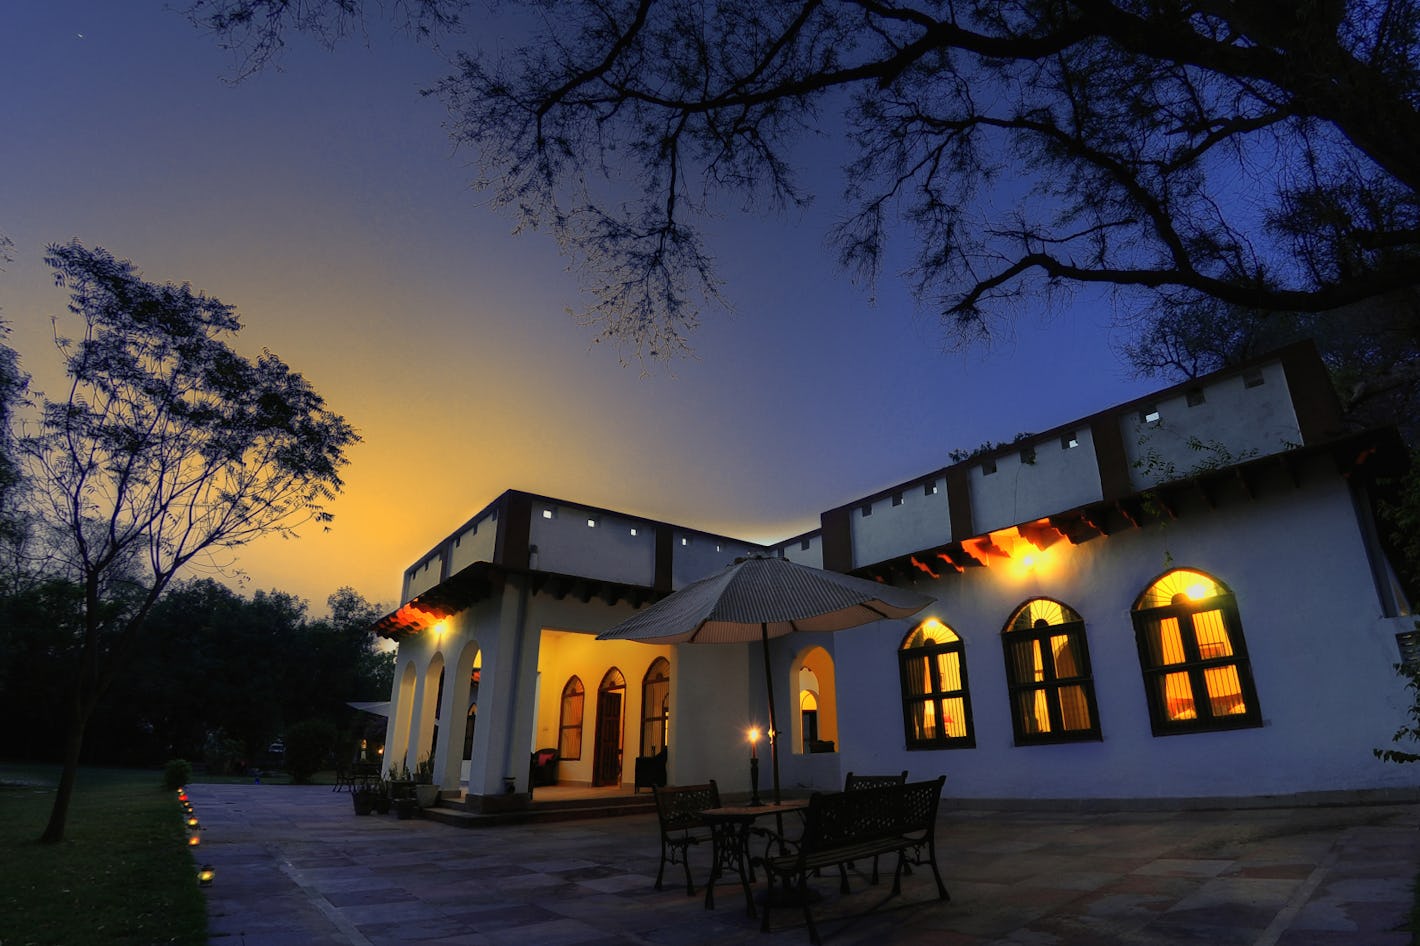 Set just an hour outside Agra, Chambal Safari Lodge is a peaceful woodland getaway, built and managed by passionate conservationist and naturalist, Ram Pratap Singh. A descendent of the Singh family, who own much of the surrounding farmland, Singh...